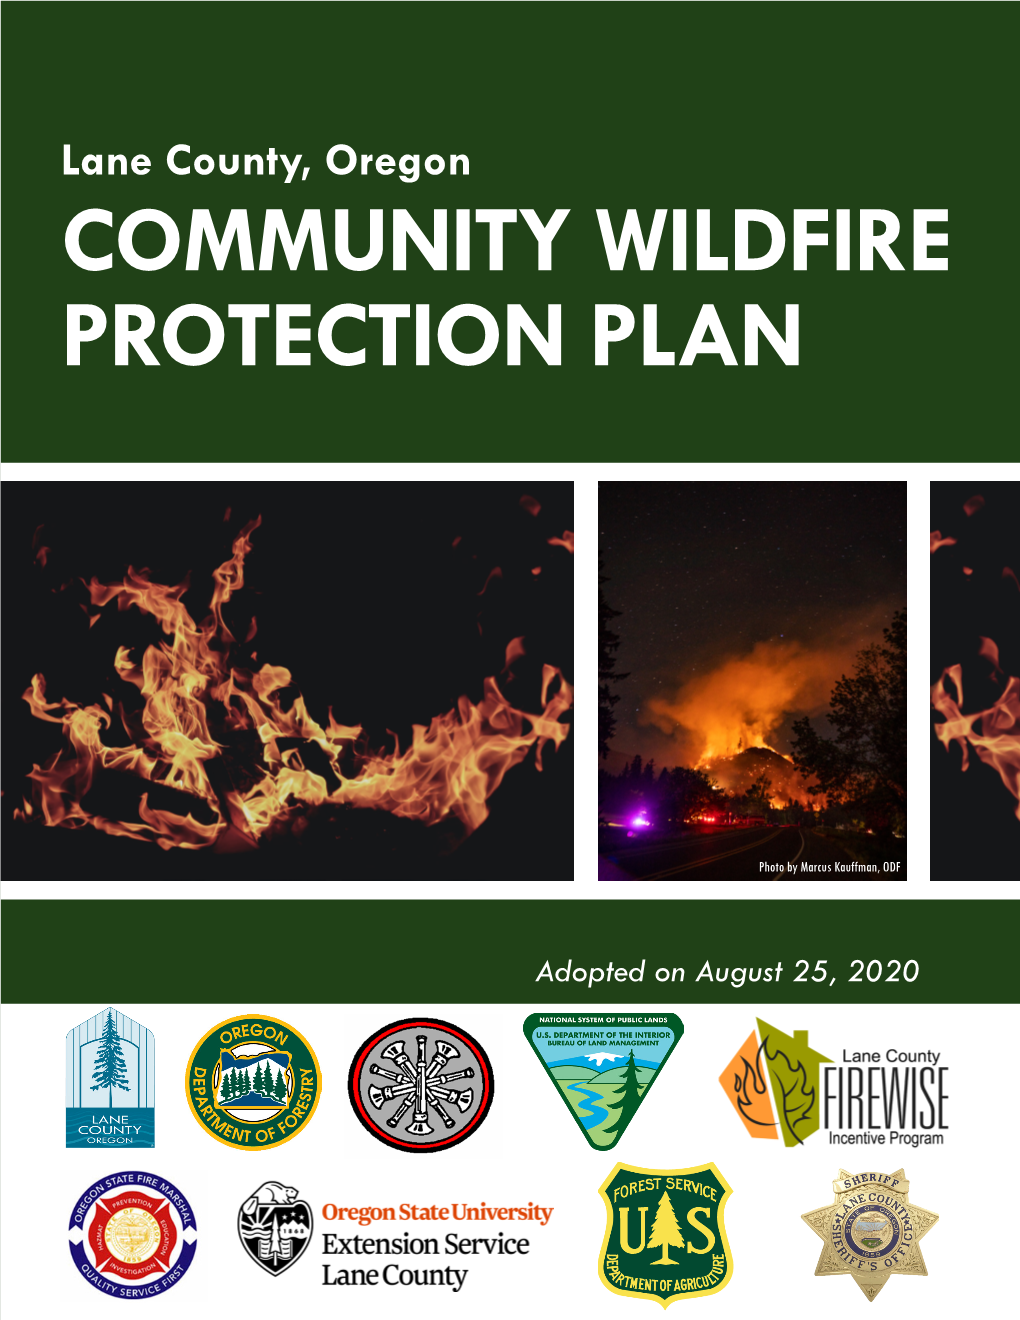 Lane County Community Wildfire Protection Plan